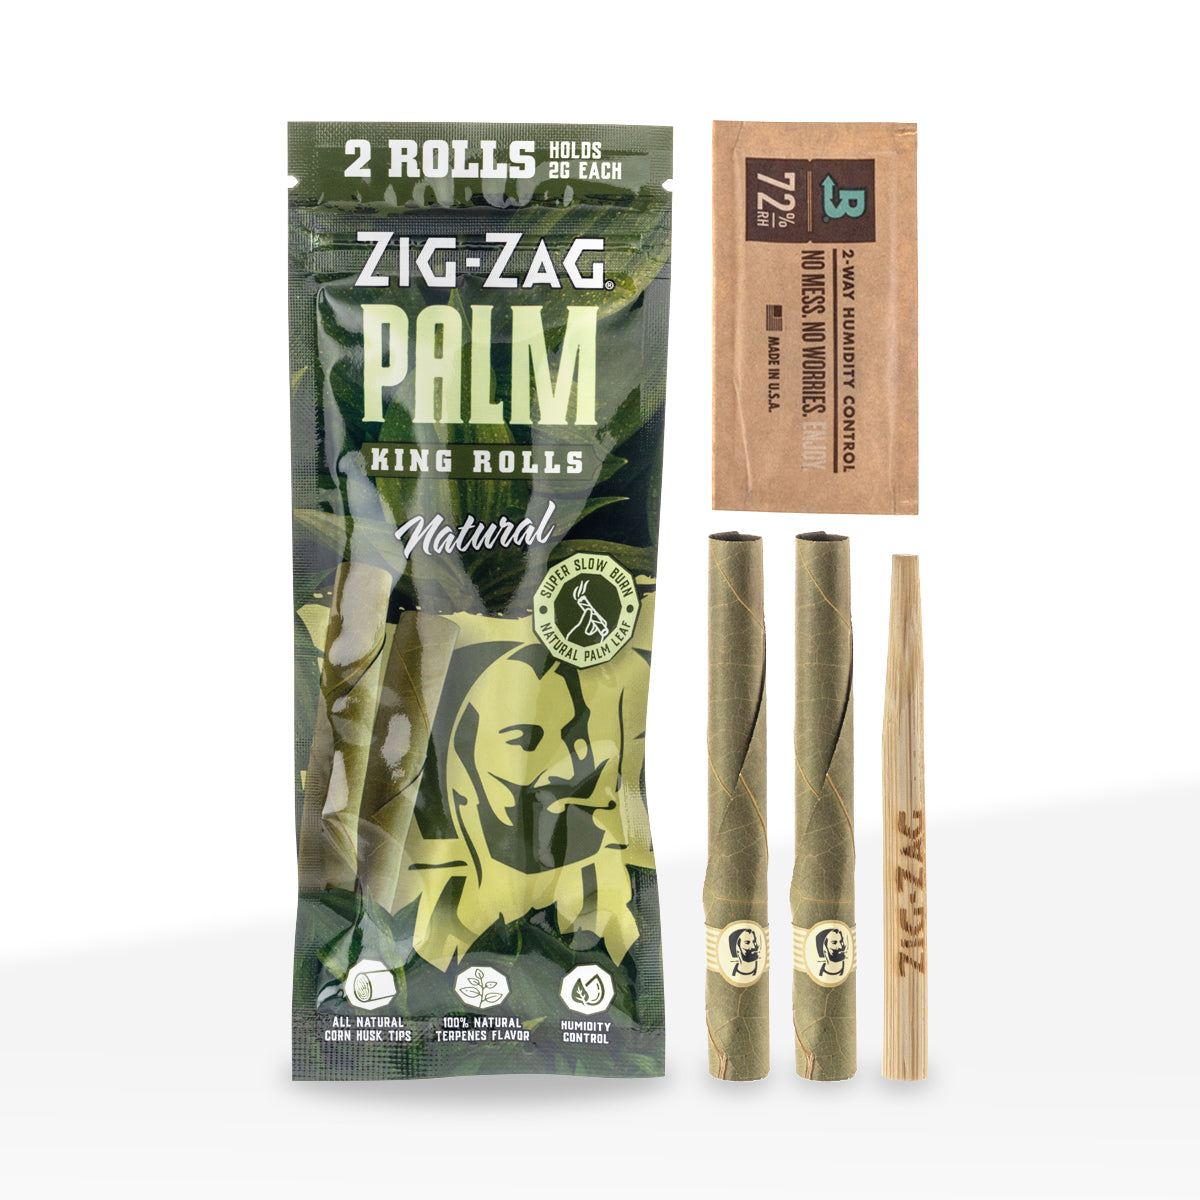 Zig-Zag® | Palm King Rolls | Natural - Various Packs Palm Pre Rolled Wraps Zig Zag   